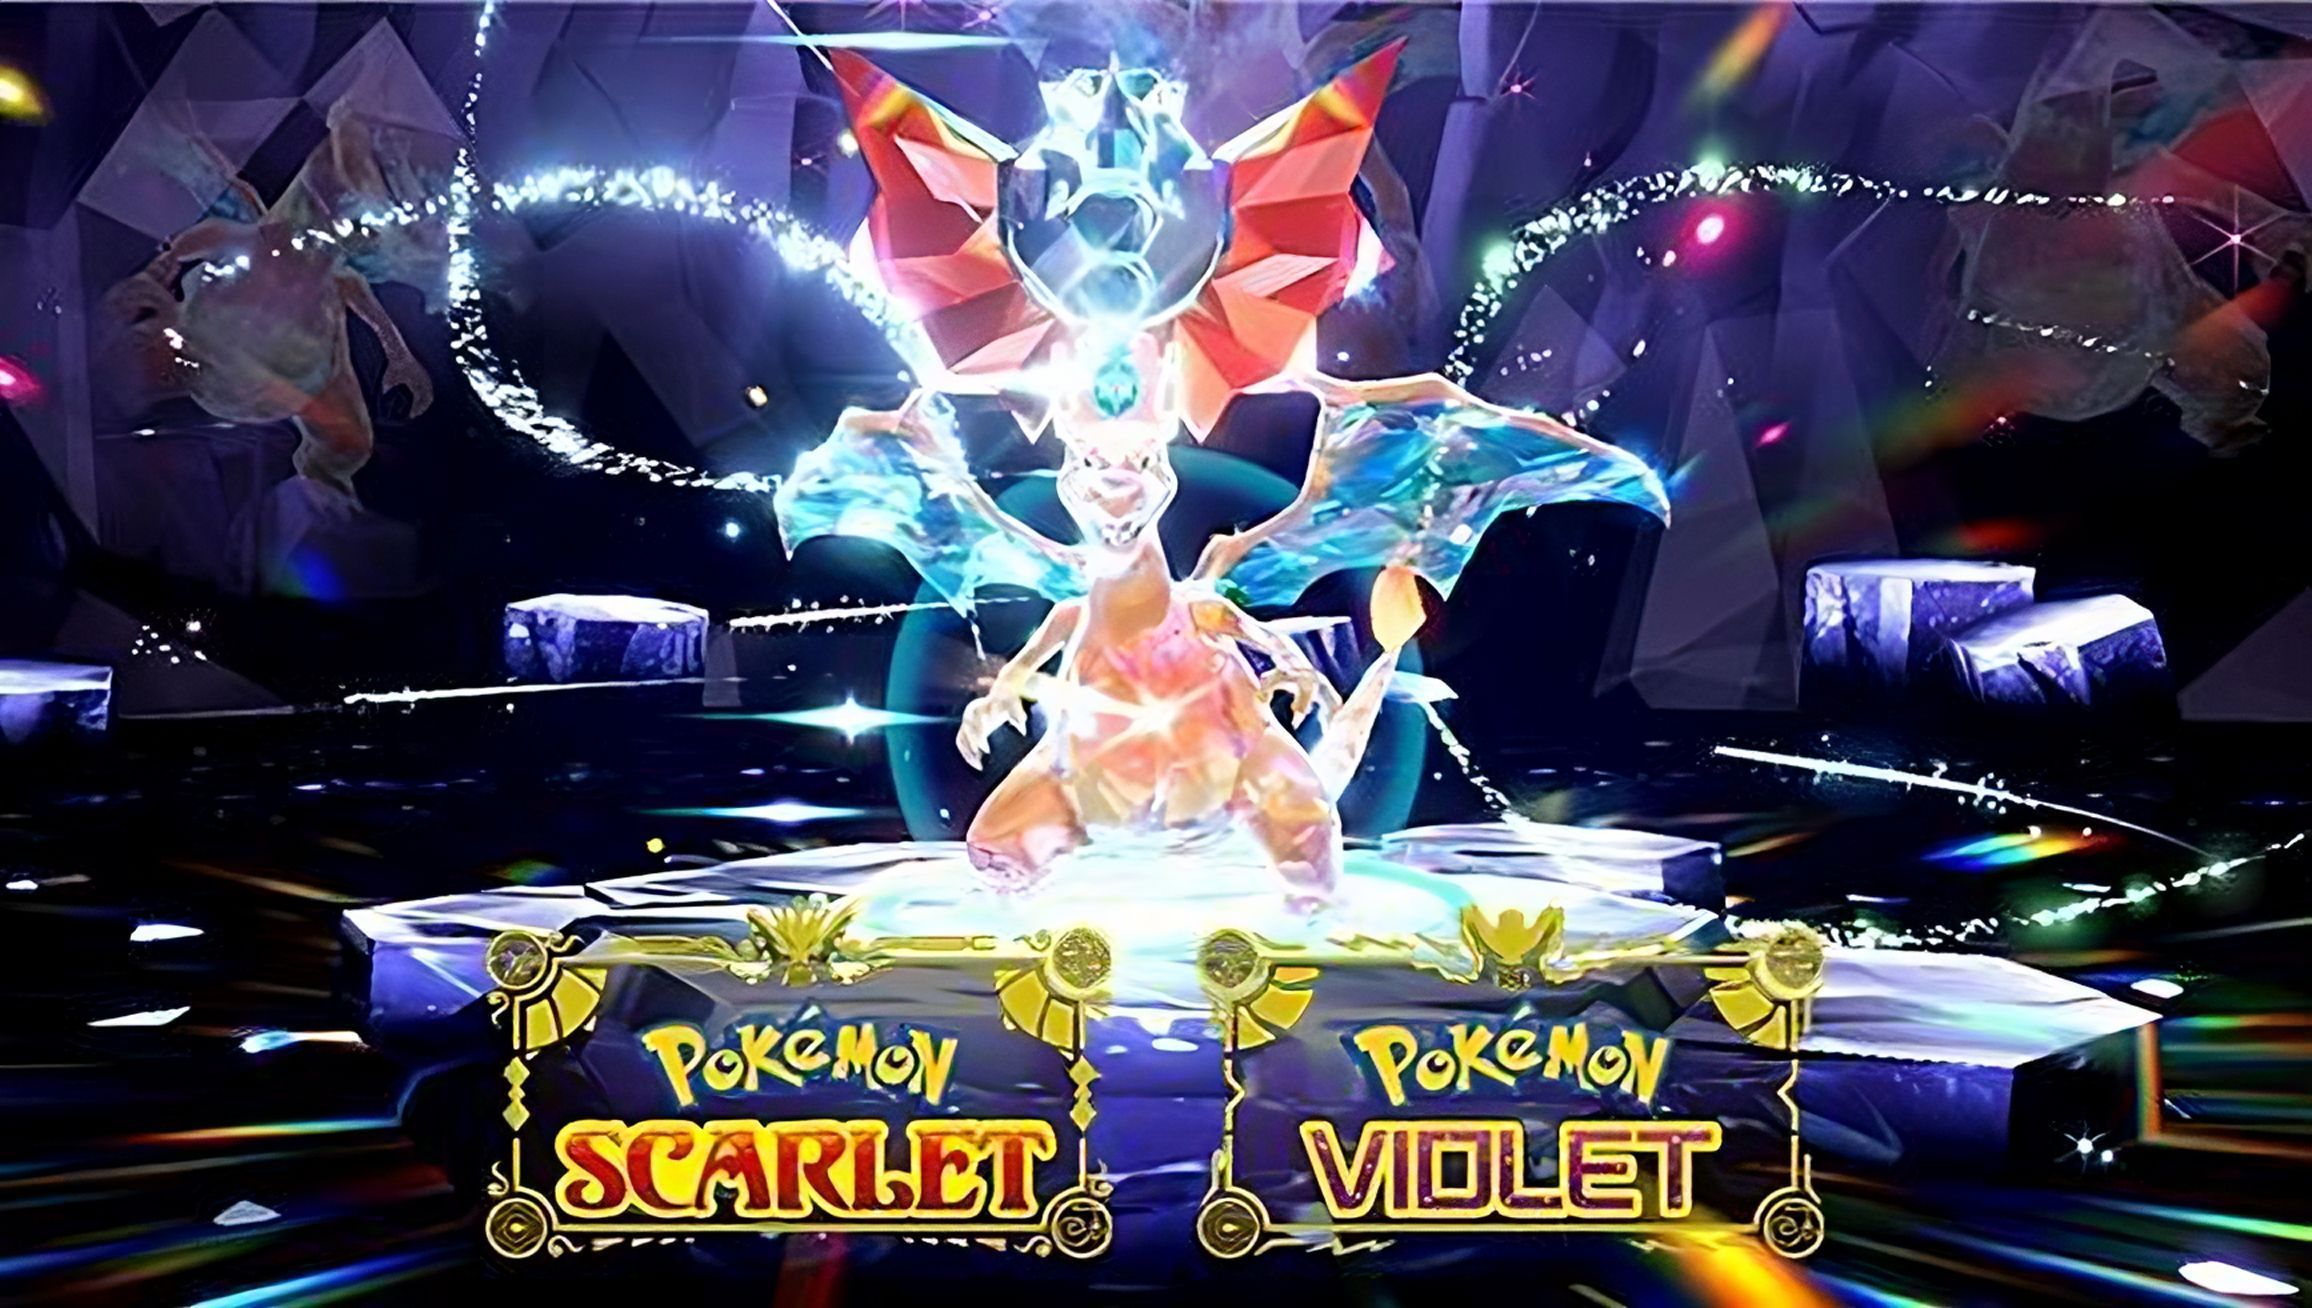 How do you get Charizard in Scarlet Violet?